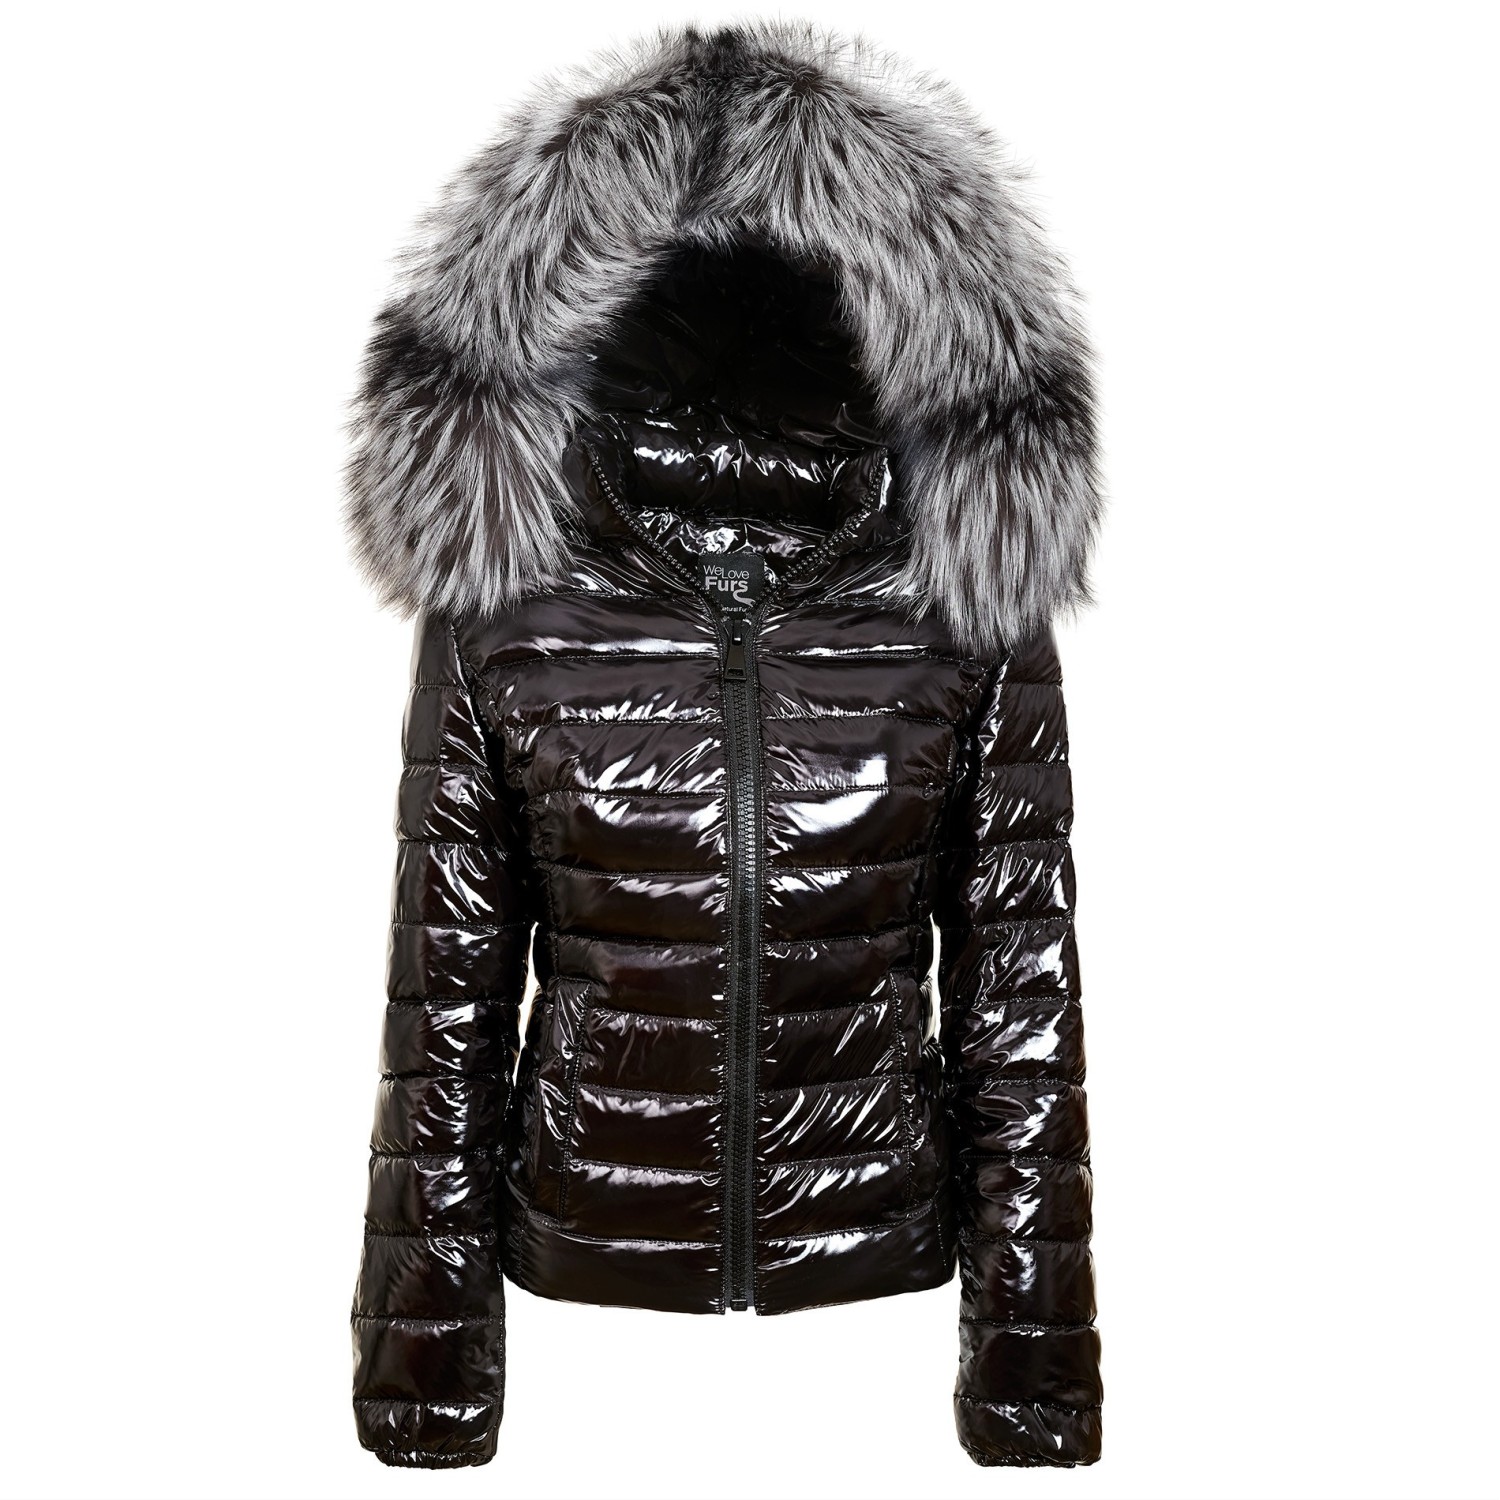 Puffer jacket with fur hood